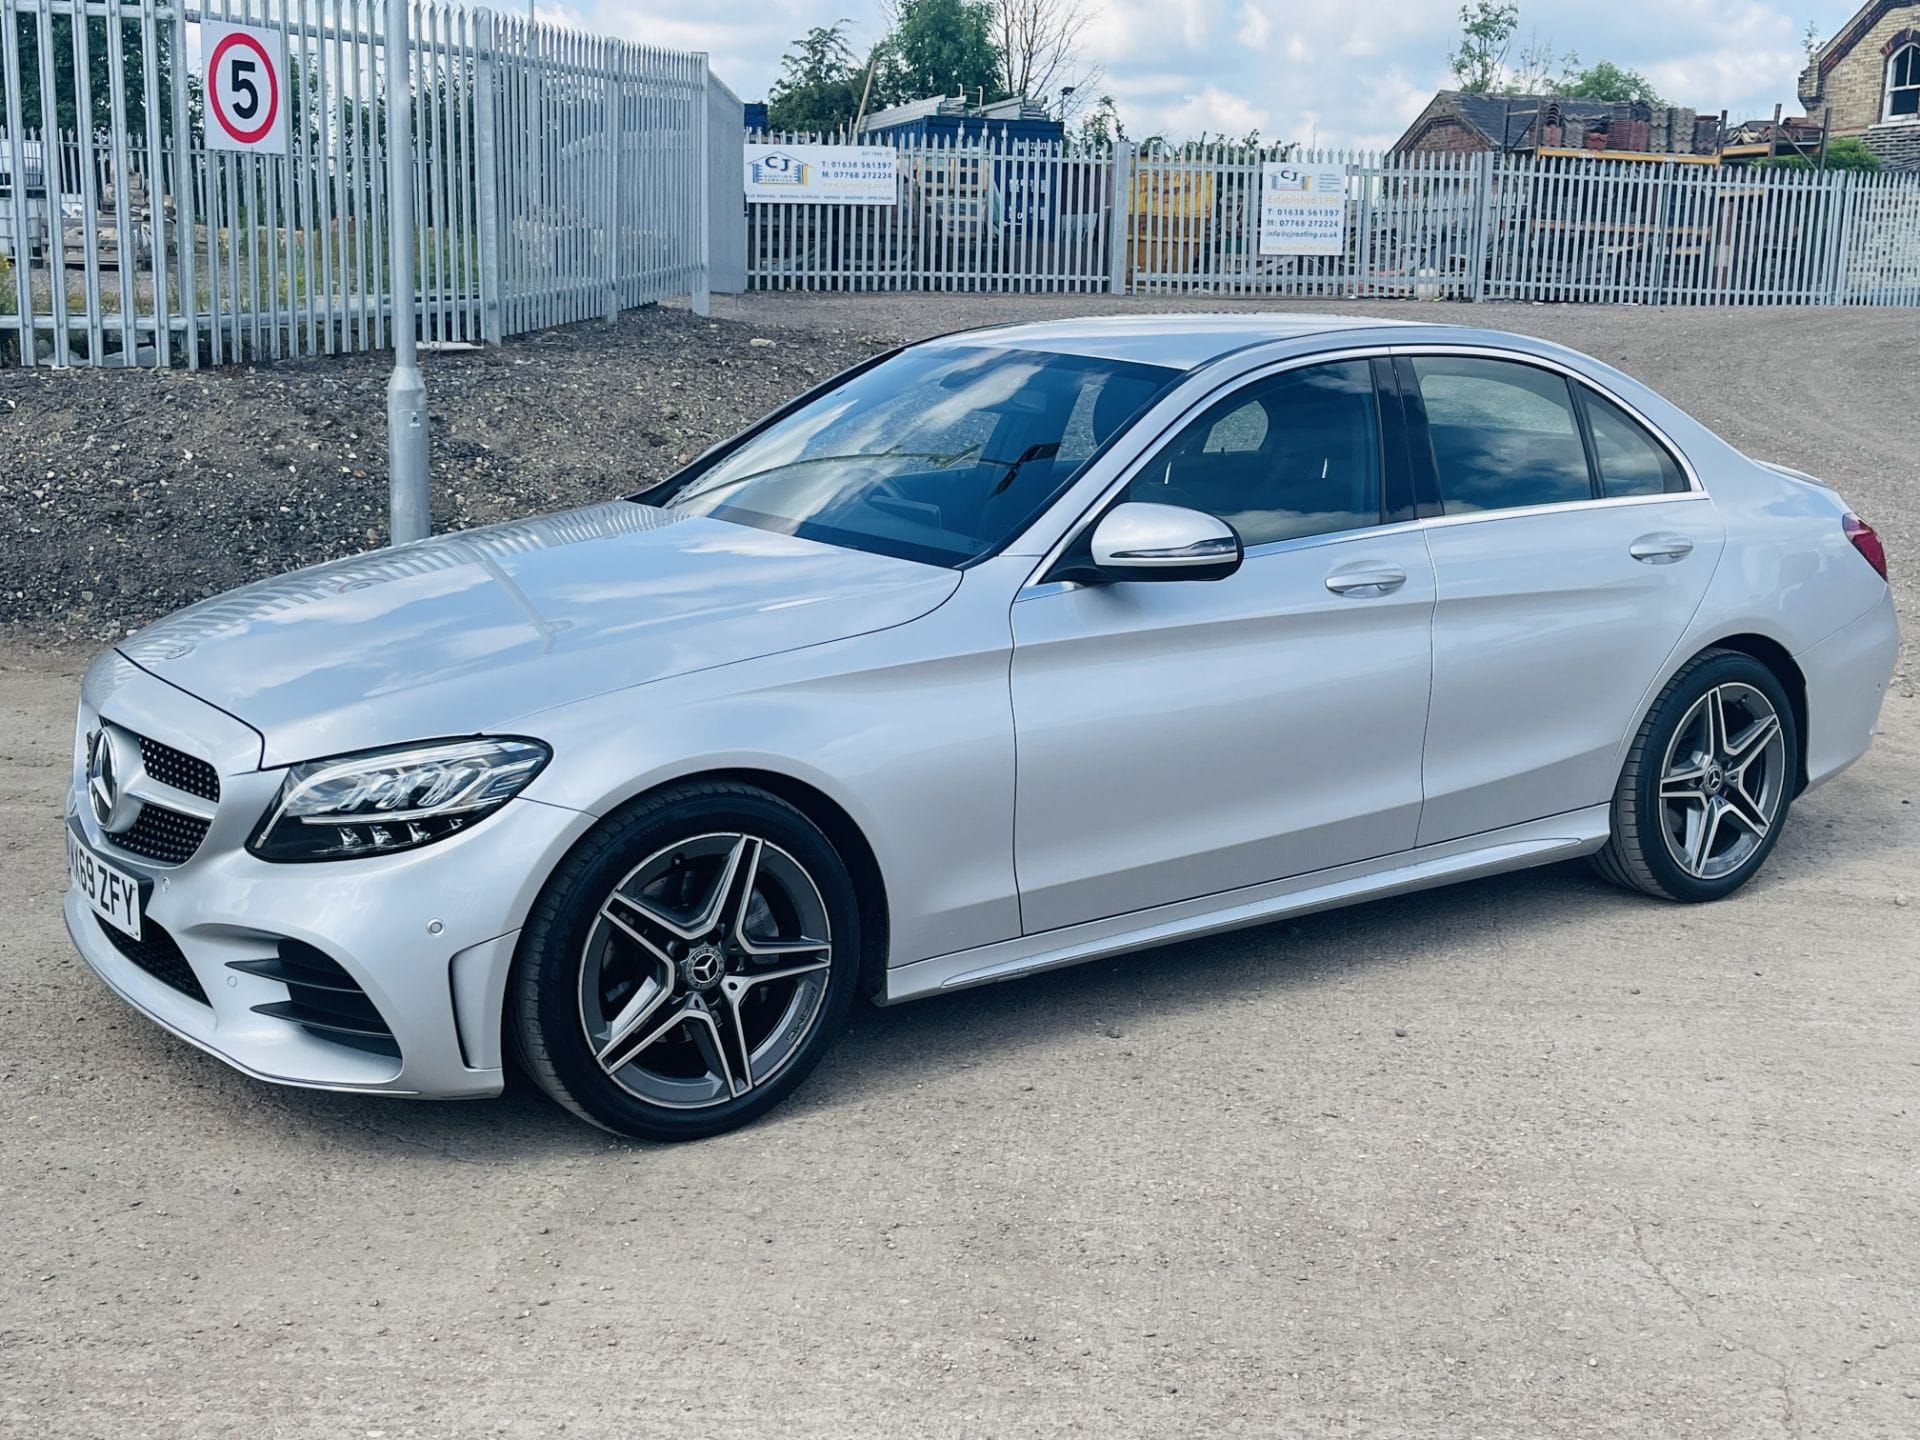 2019 MERCEDES C CLASS AMG - Image 9 of 26